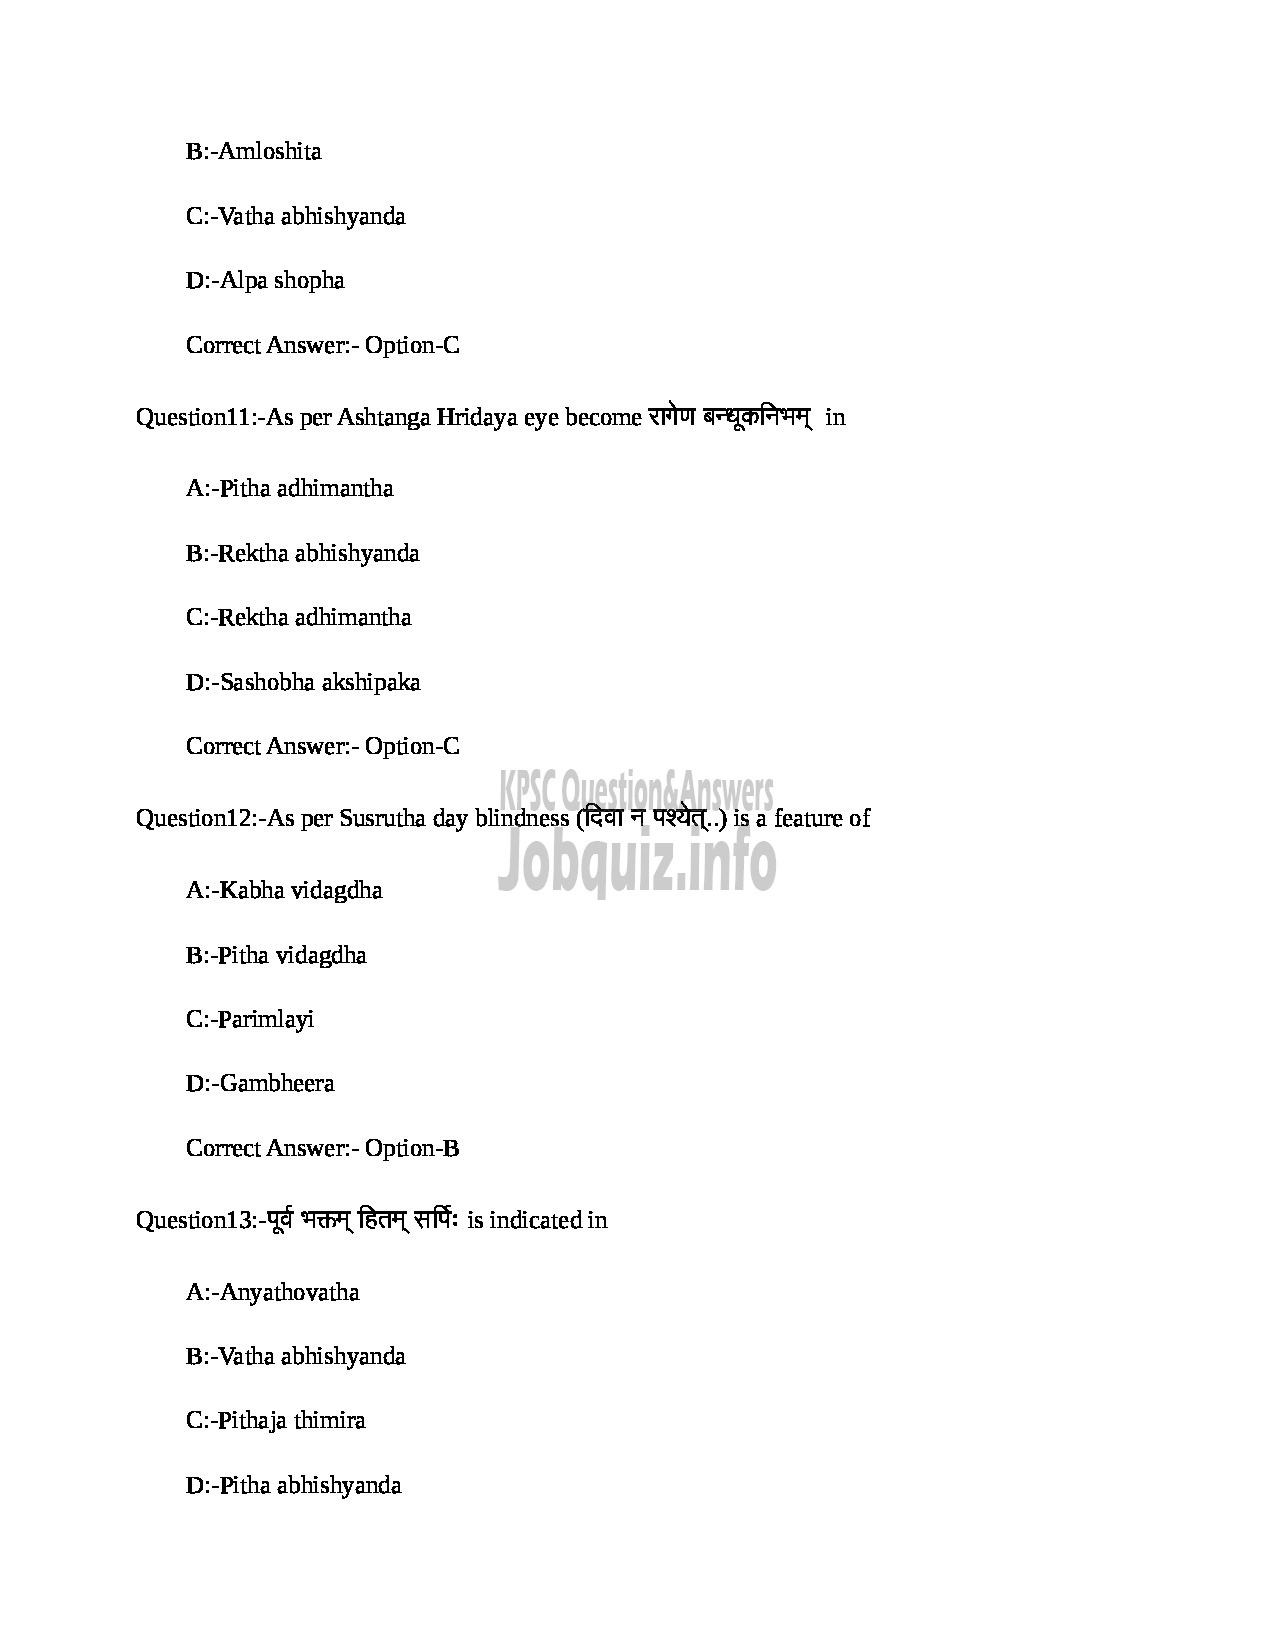 Kerala PSC Question Paper - MEDICAL OFFICER (NETRA) INDIAN SYSTEMS OF MEDICINE-4